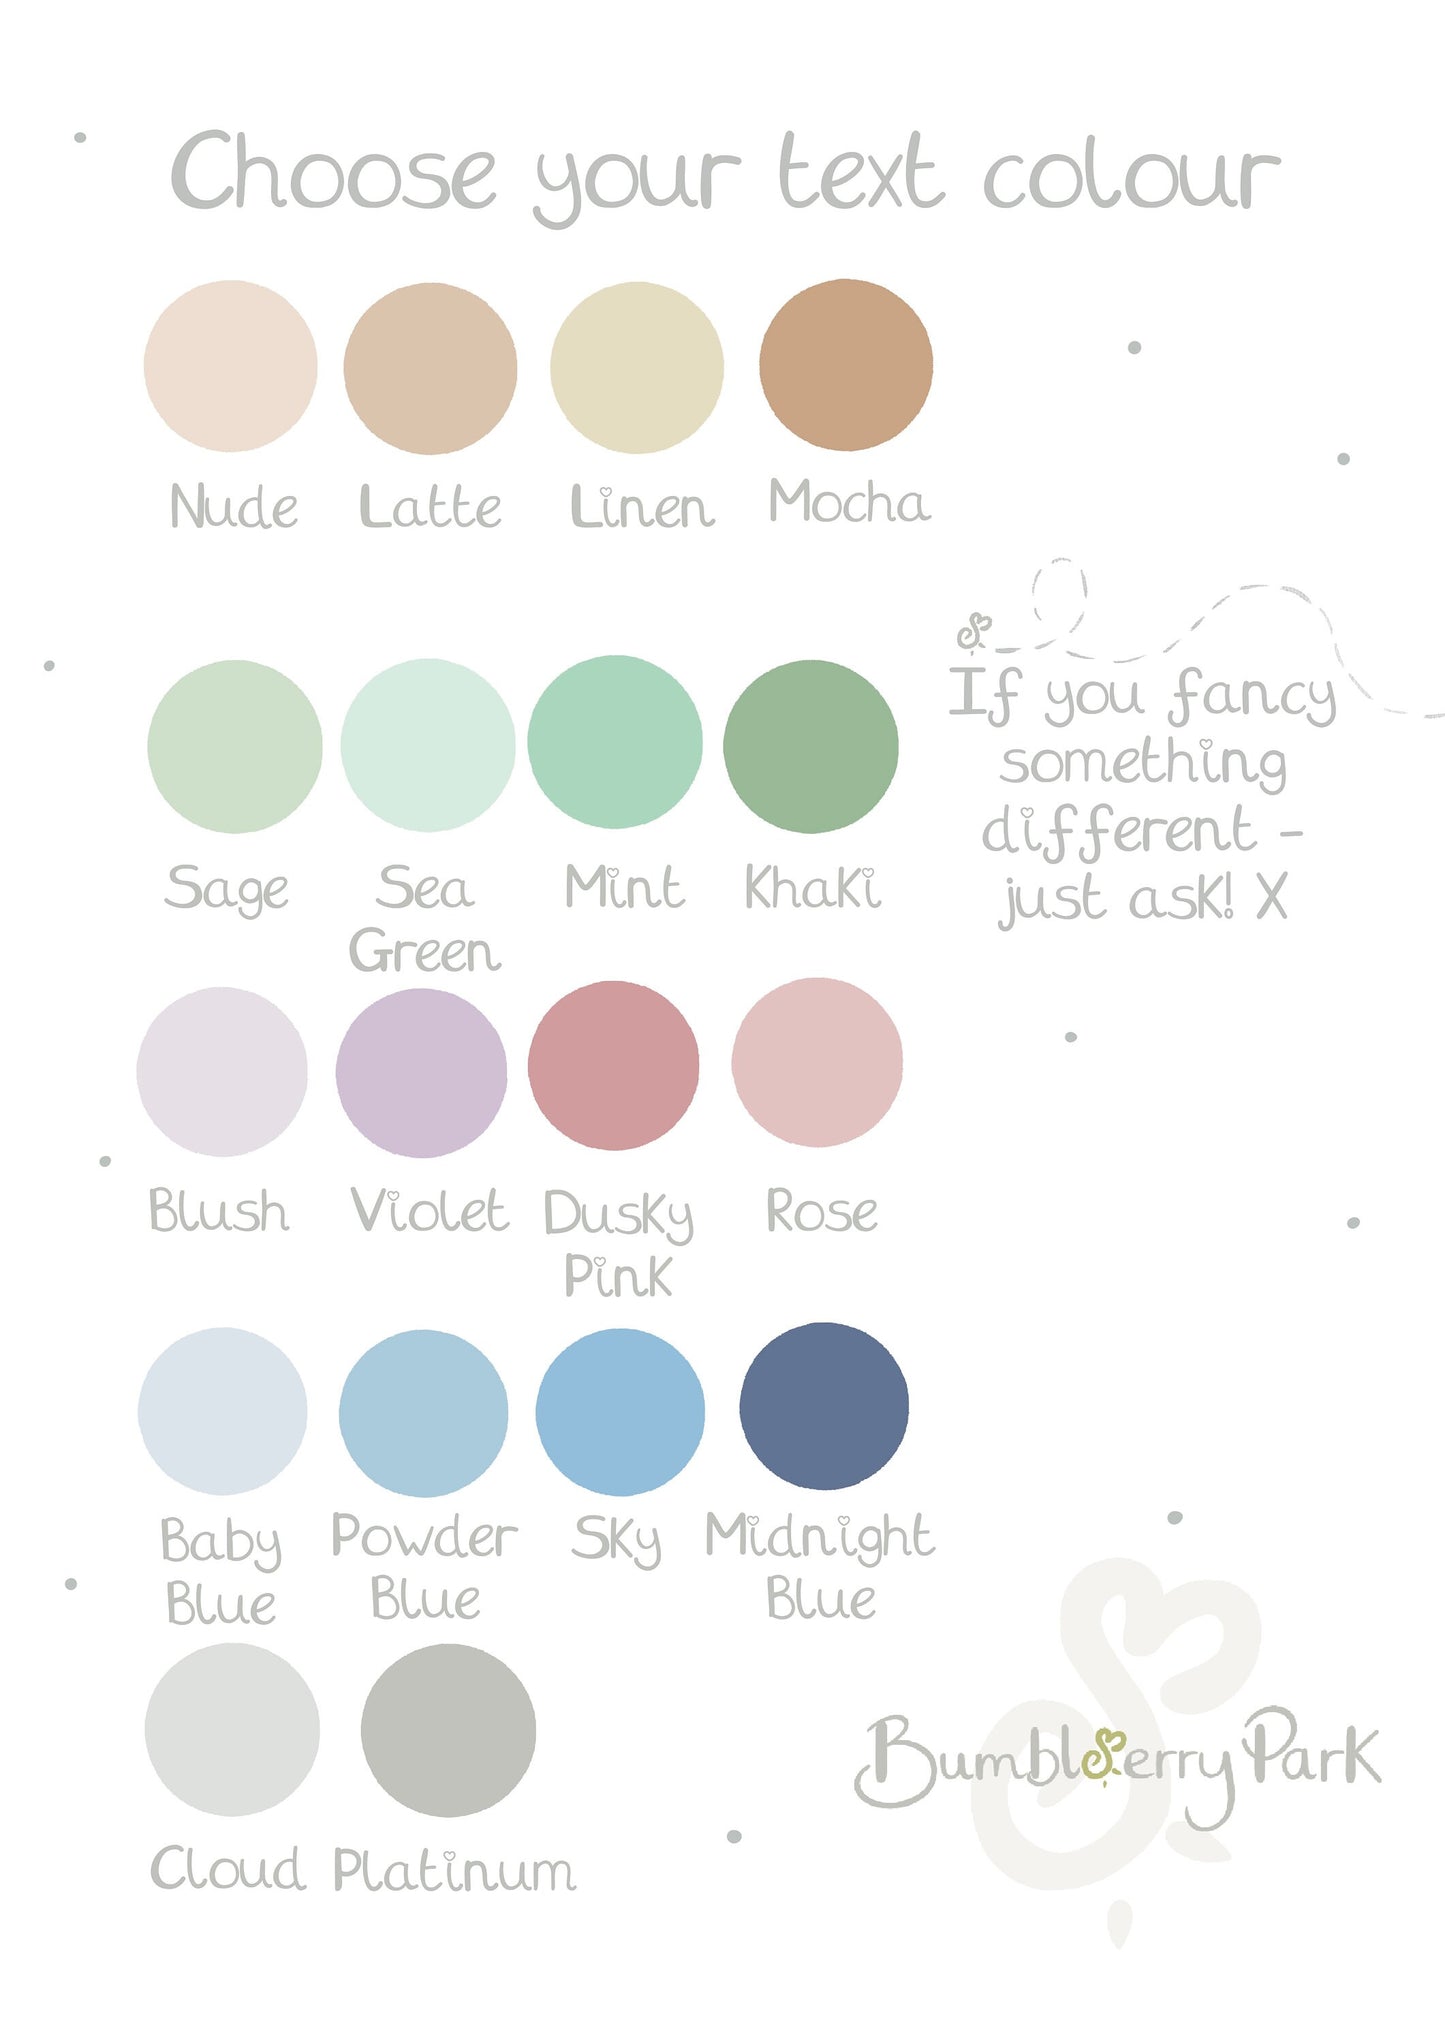 colour chart to select text colour for personalised nursery print for boys and girls bedroom